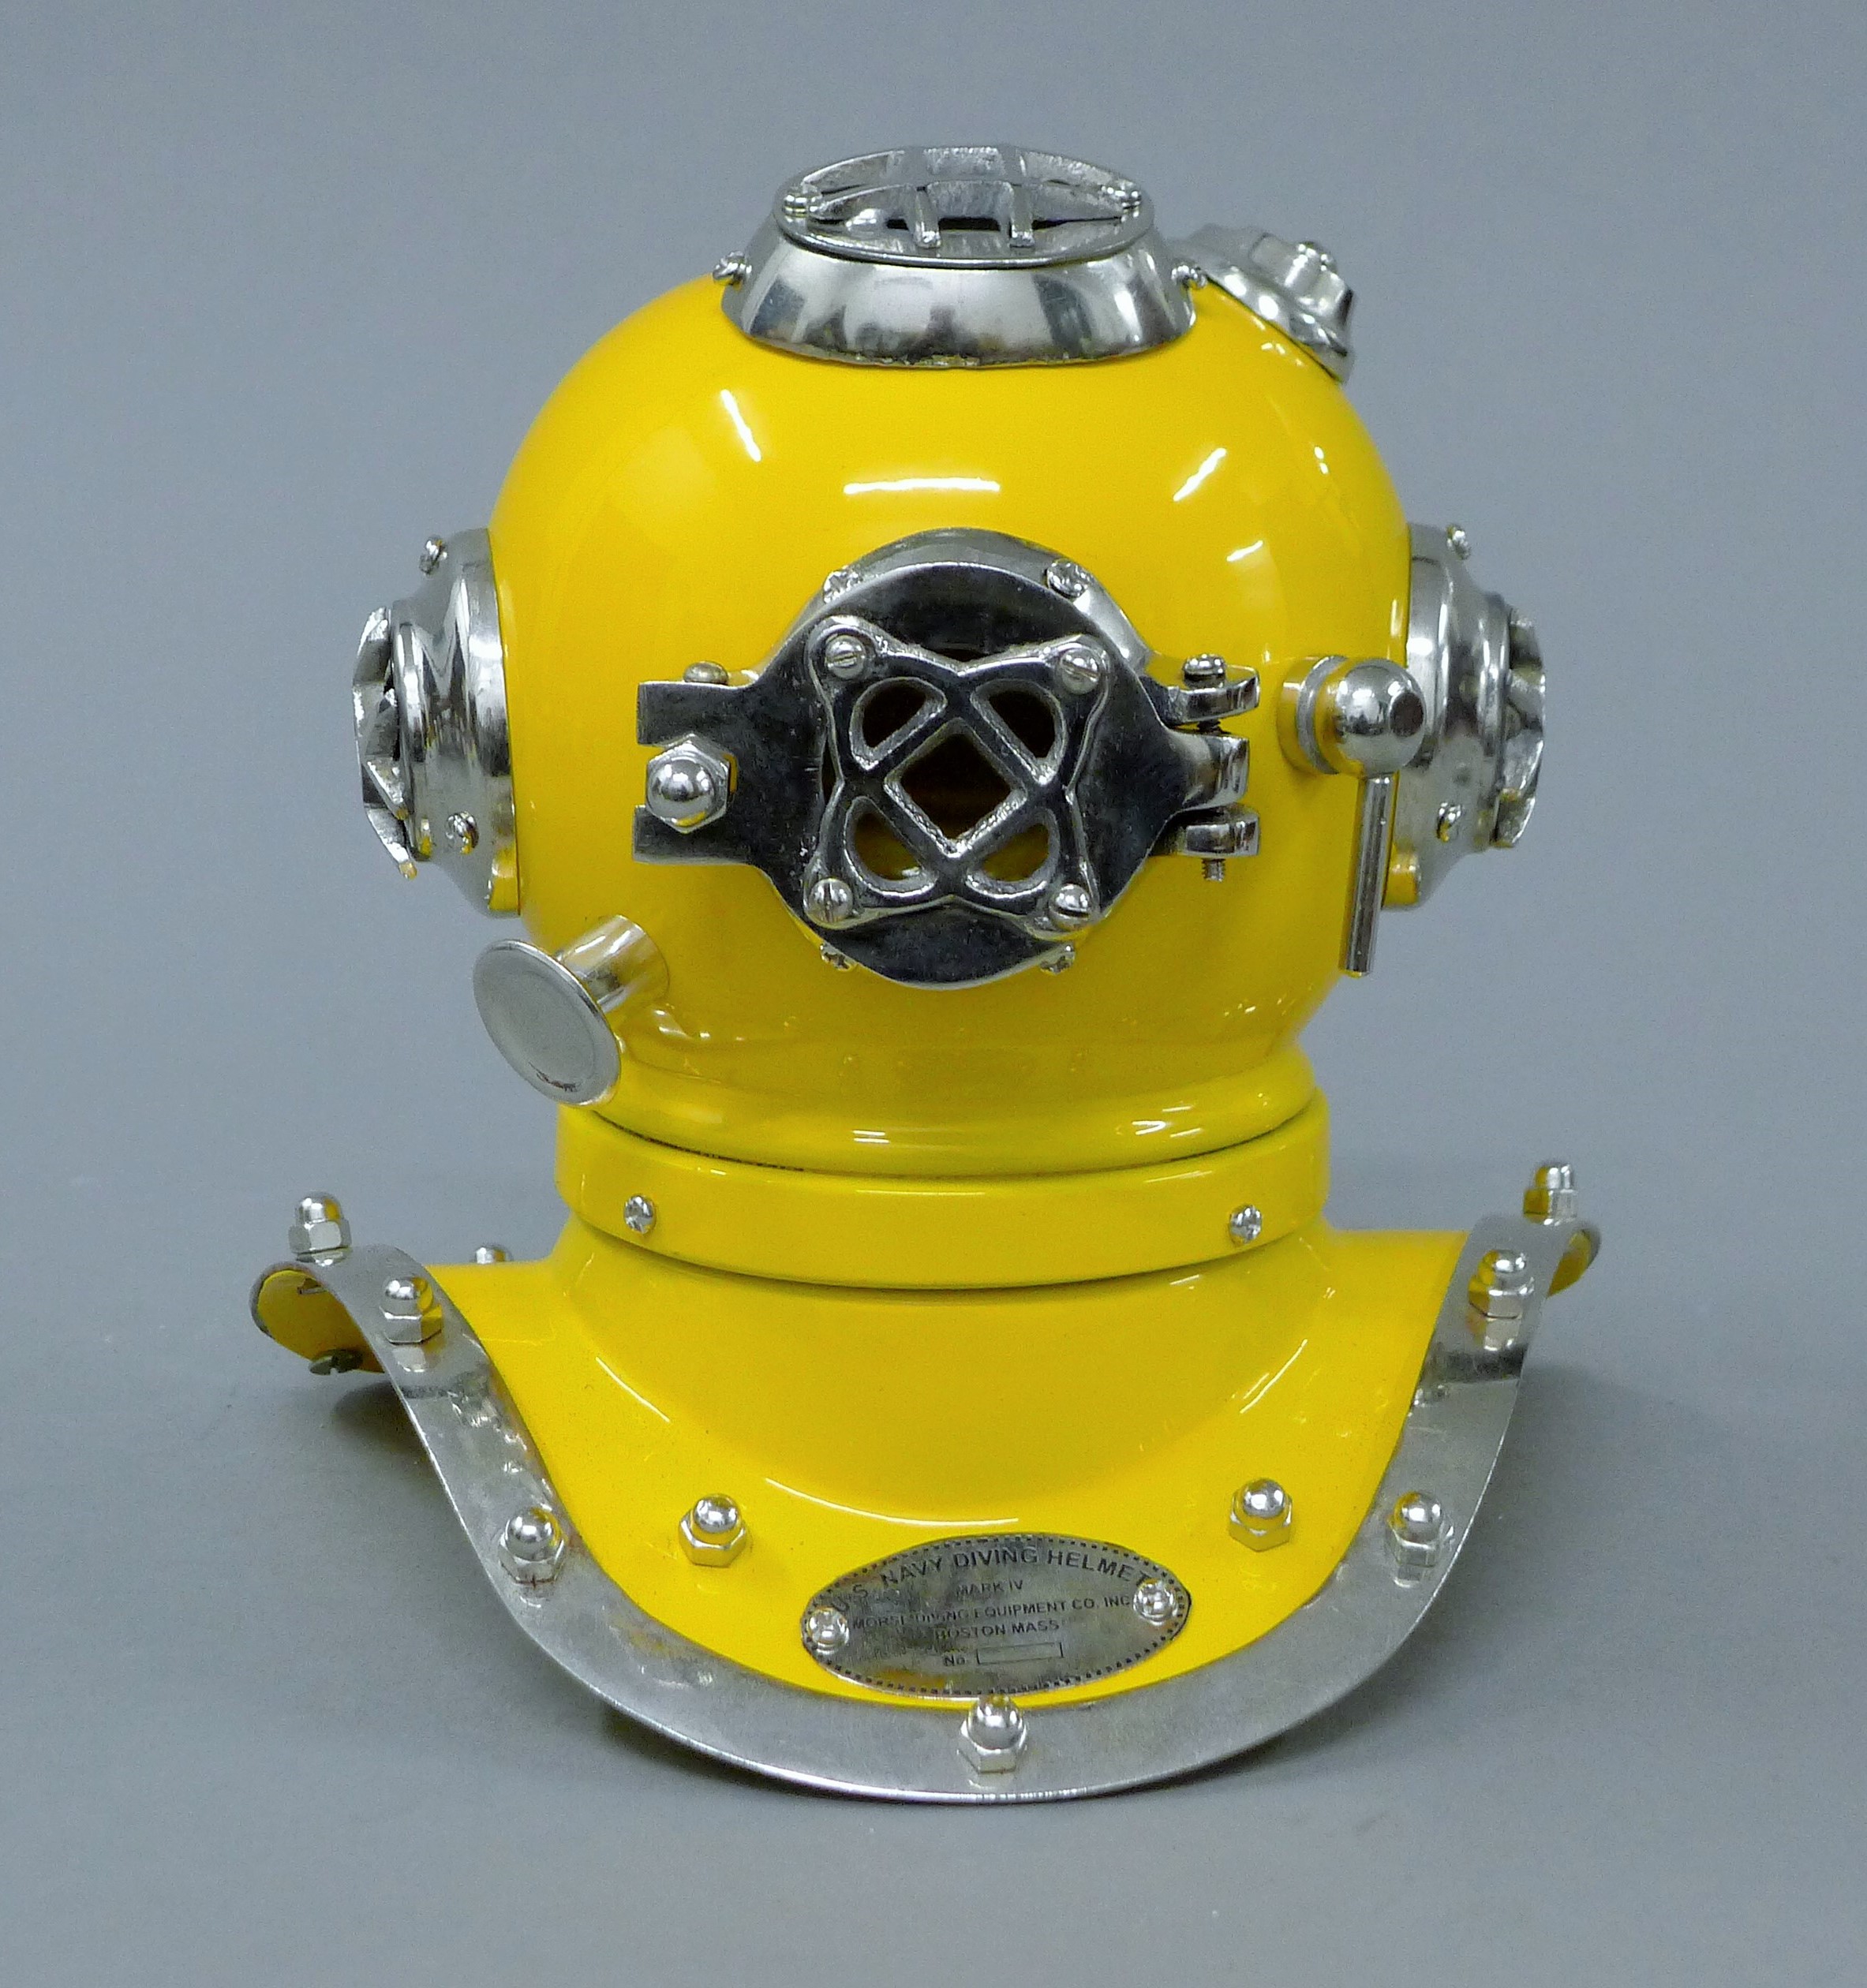 A miniature yellow diver's helmet. 18 cm high. - Image 2 of 3